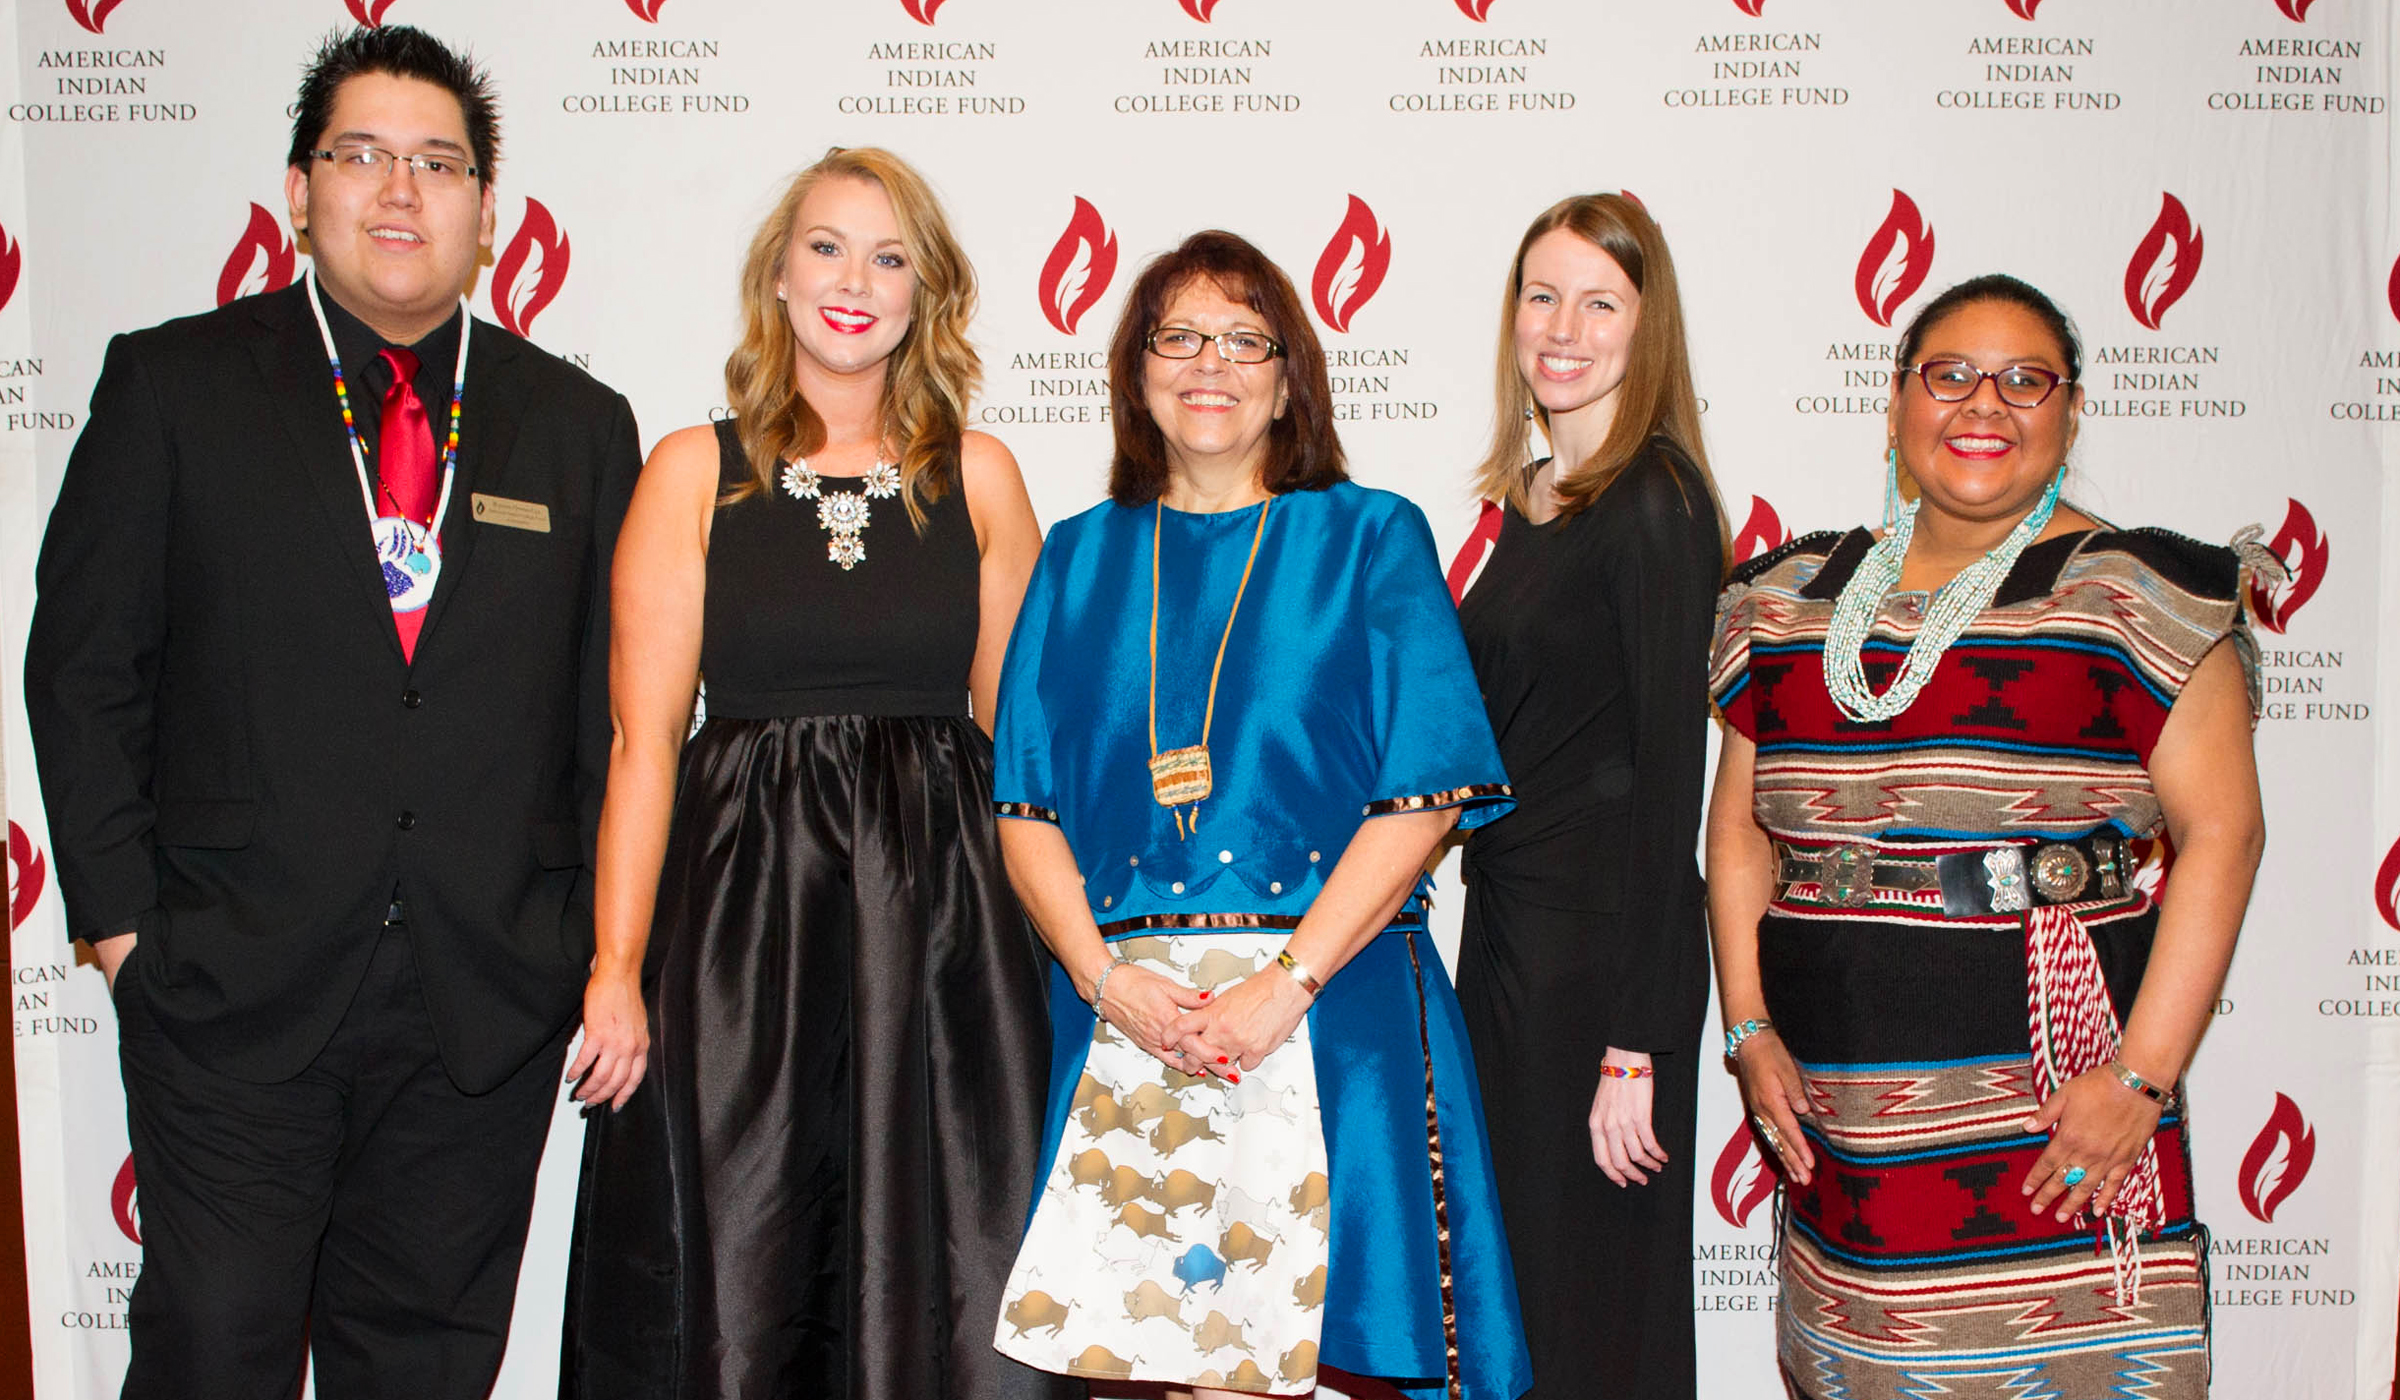 Cheryl Crazy Bull and the Native Scholars pose for a photo at the Flame of Hope Gala in New York City on March 1, 2016.